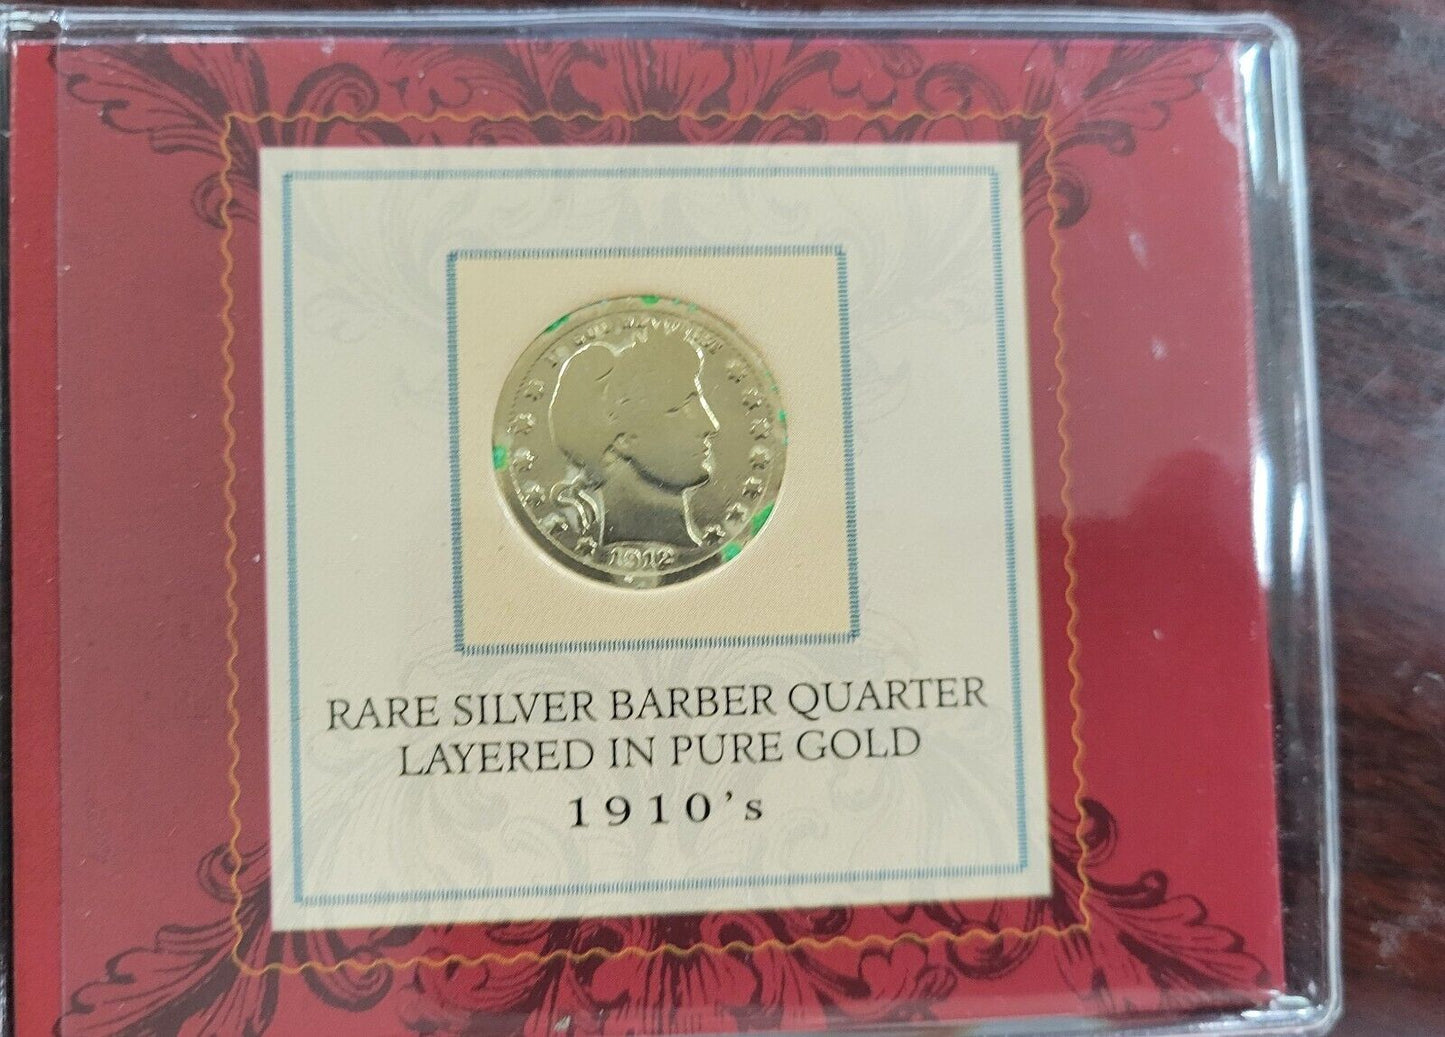 1910's Silver Barber Quarter Layered In Pure Gold - 1912